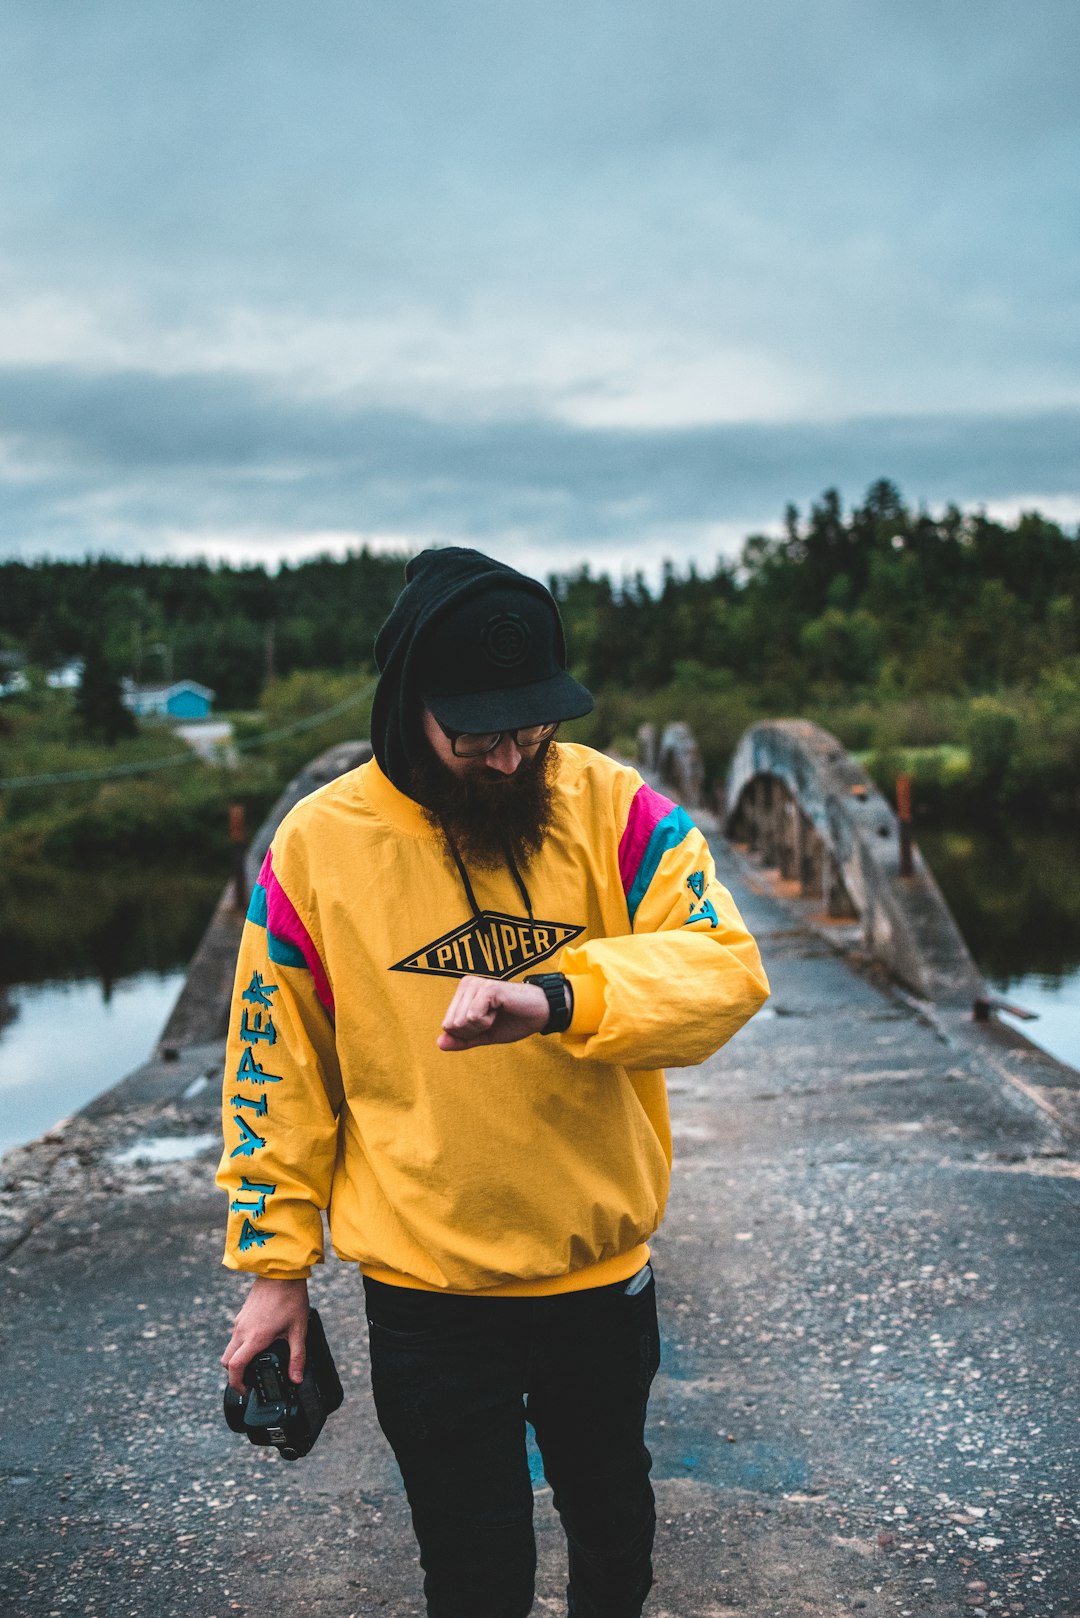 man in yellow jacket and black knit cap standing on road during daytime